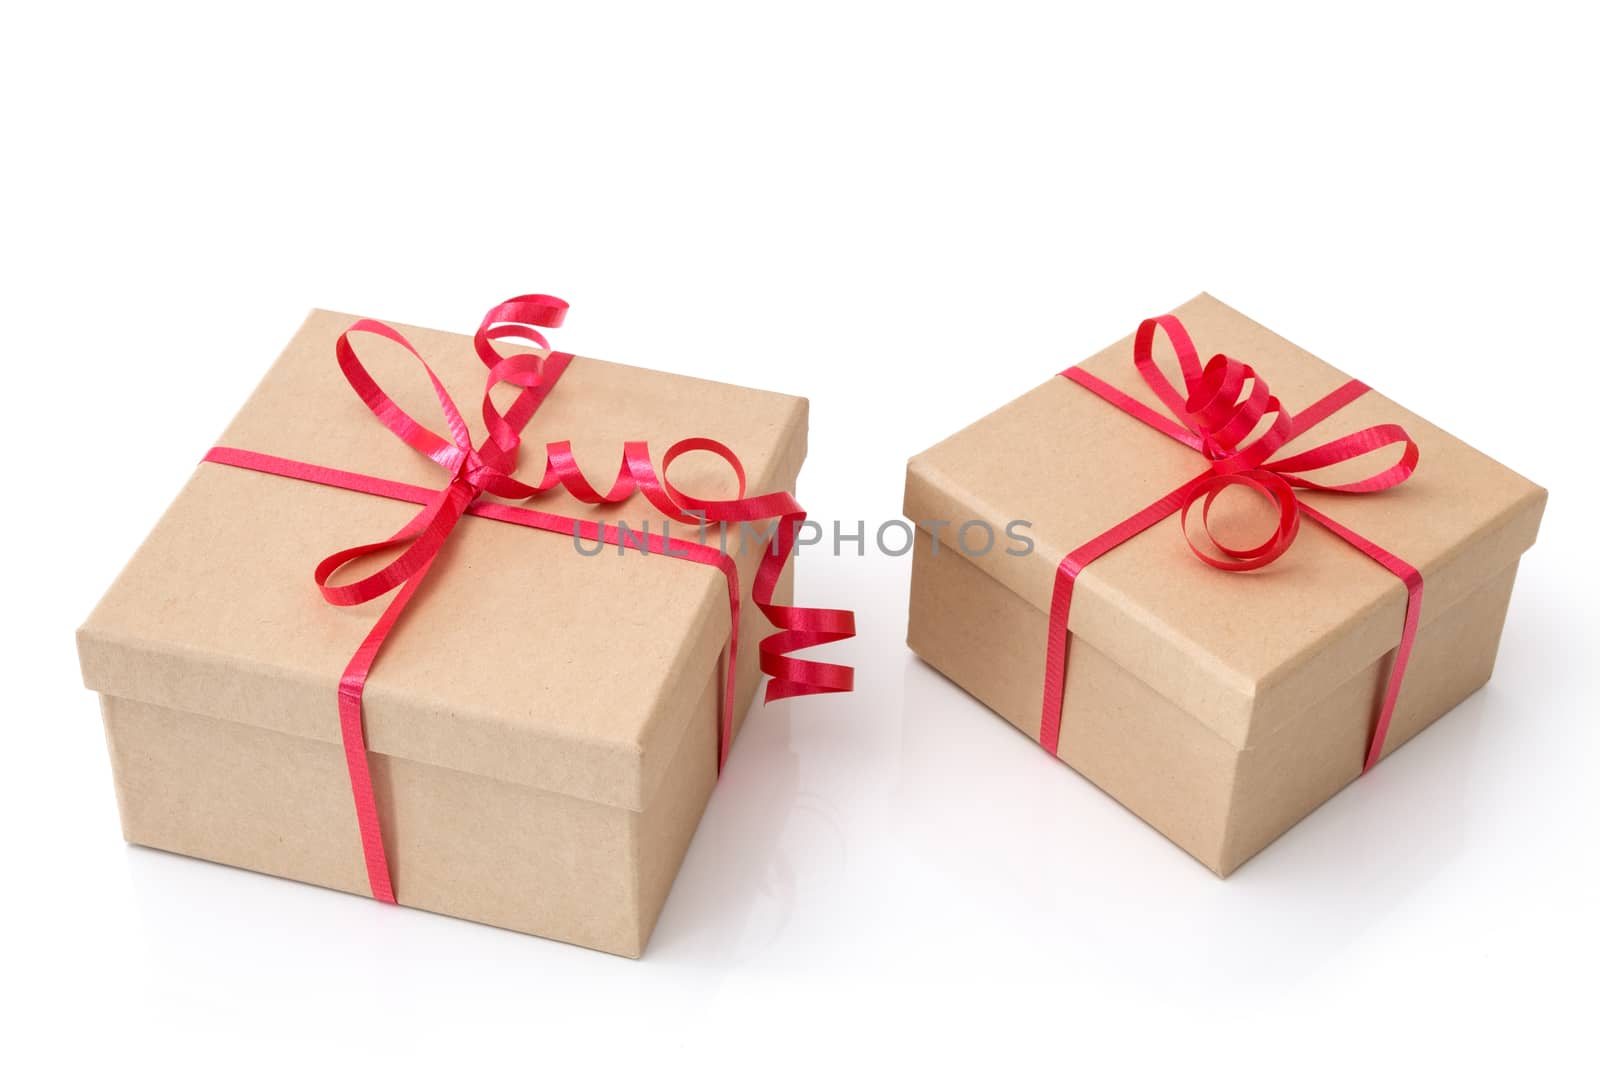 Two simple gift boxes with red ribbons, isolated on white background.